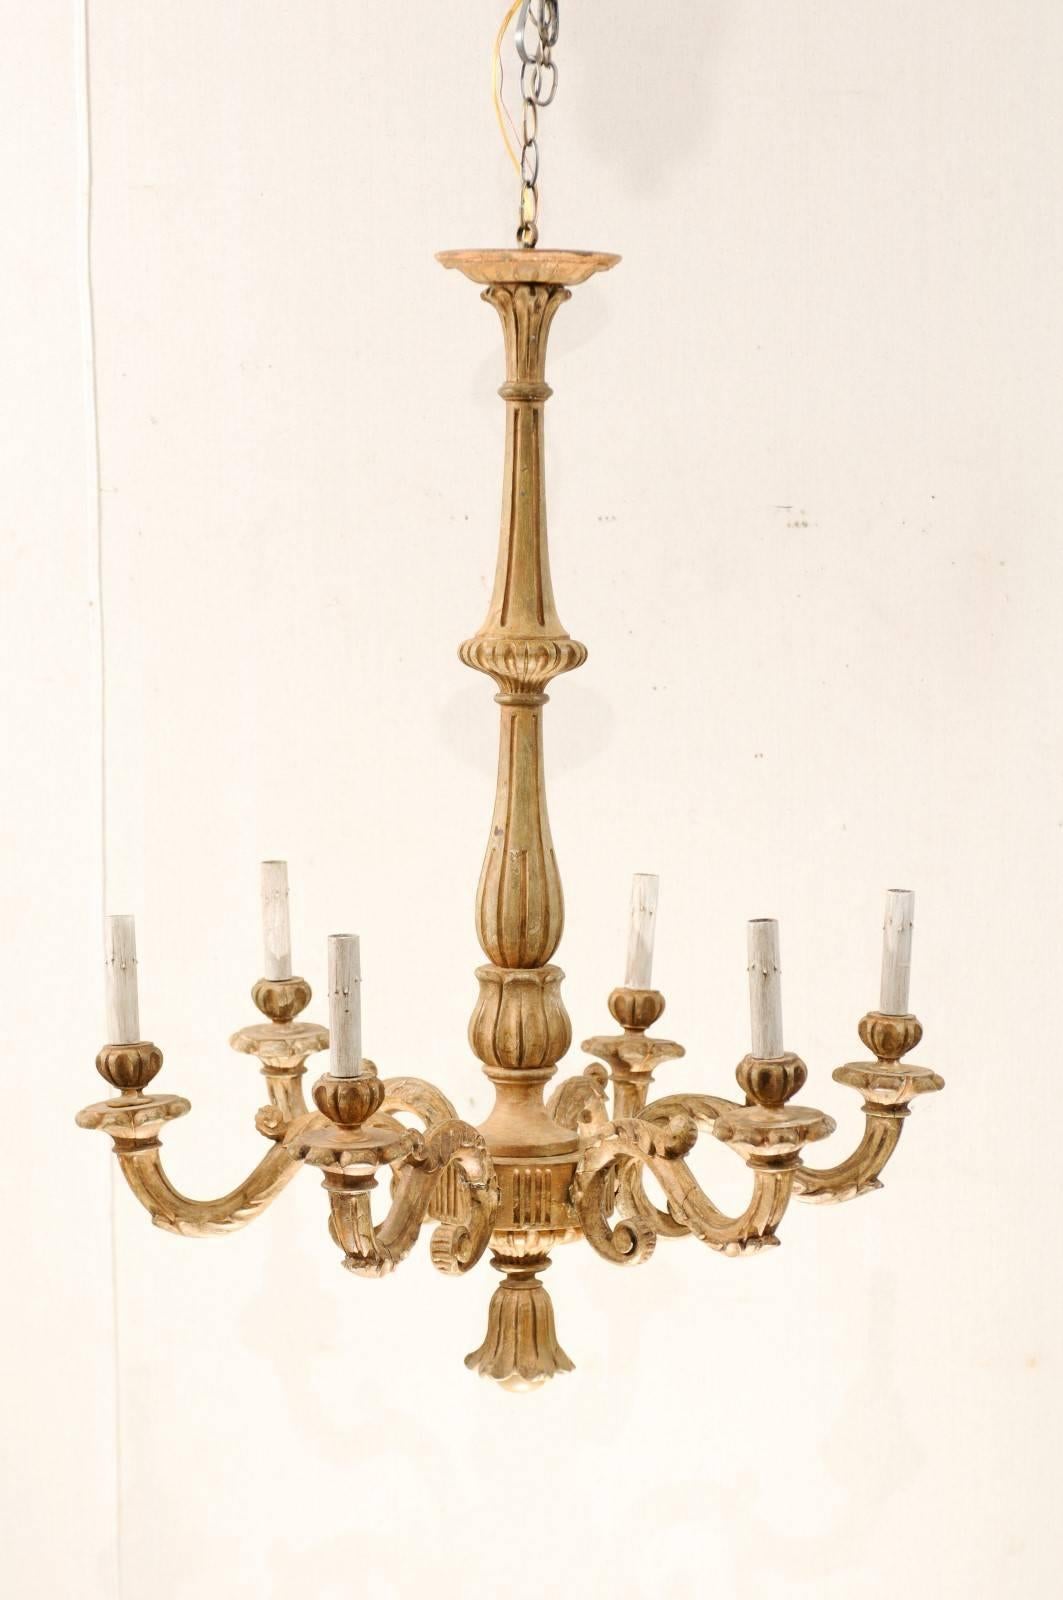 An Italian early 20th century six-light nicely carved wooden chandelier. This tall Italian chandelier features a long and slender central column. Six s-scrolled arms flow from the bottom of the central column, leading outwards towards its candle